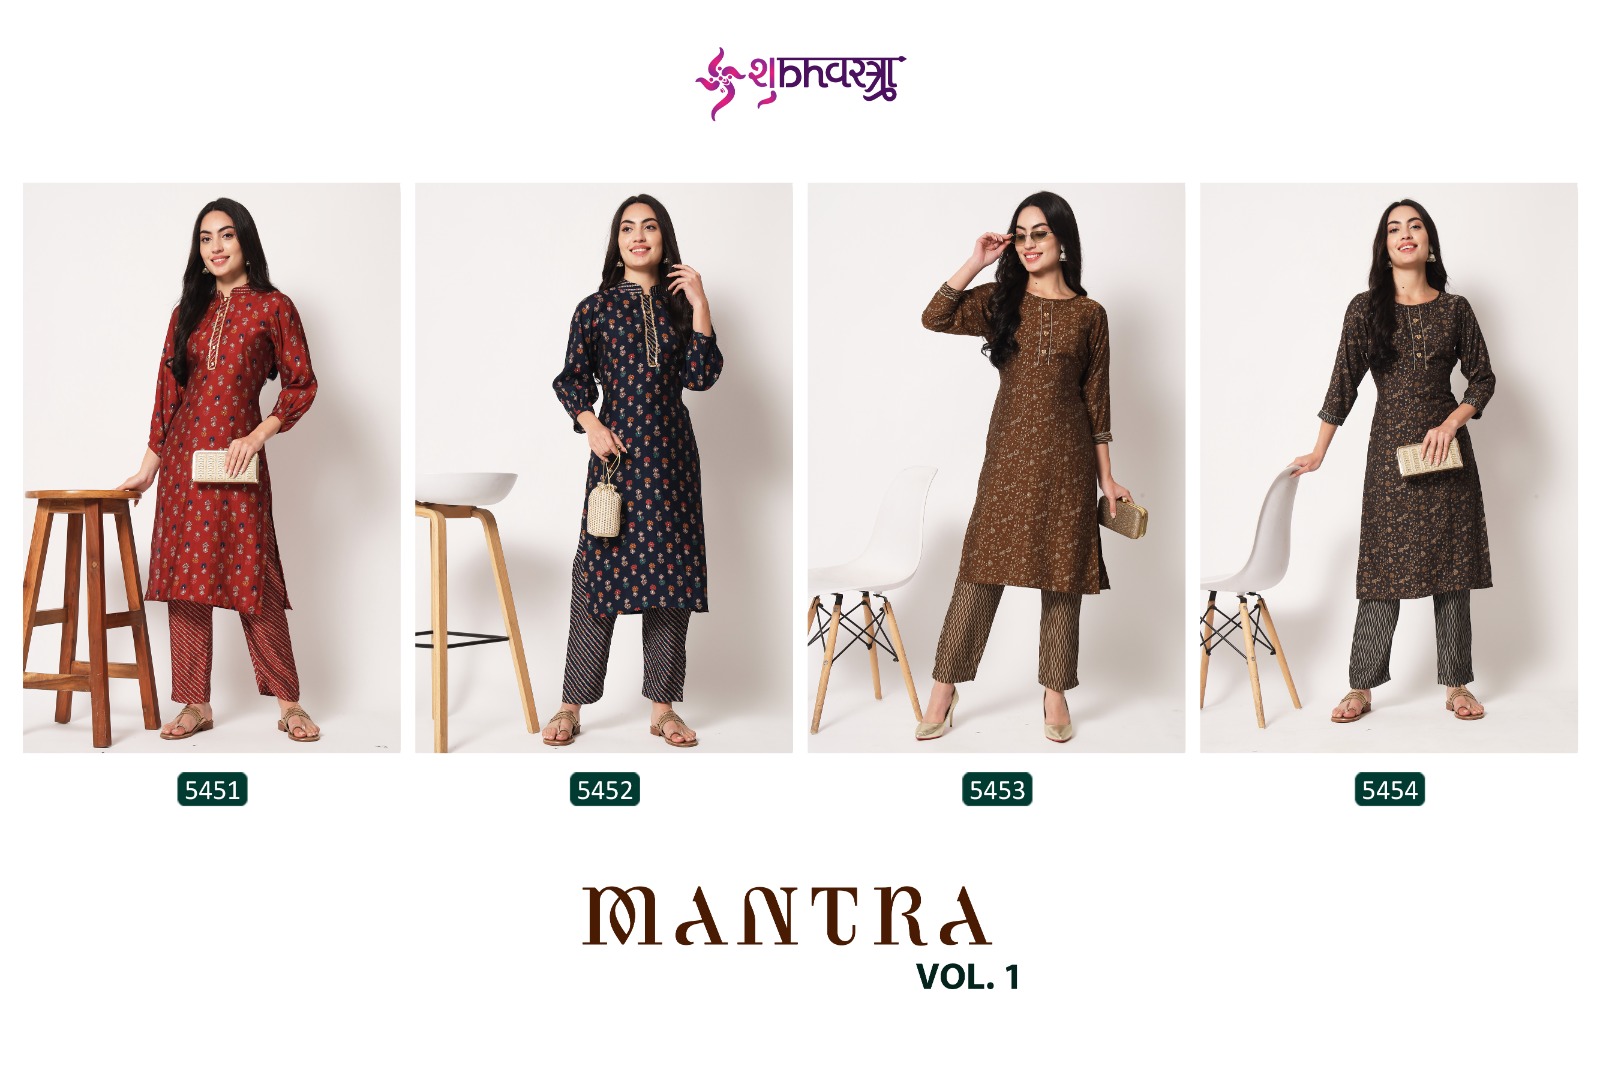 Shubhvastra Mantra Vol 1 collection 3